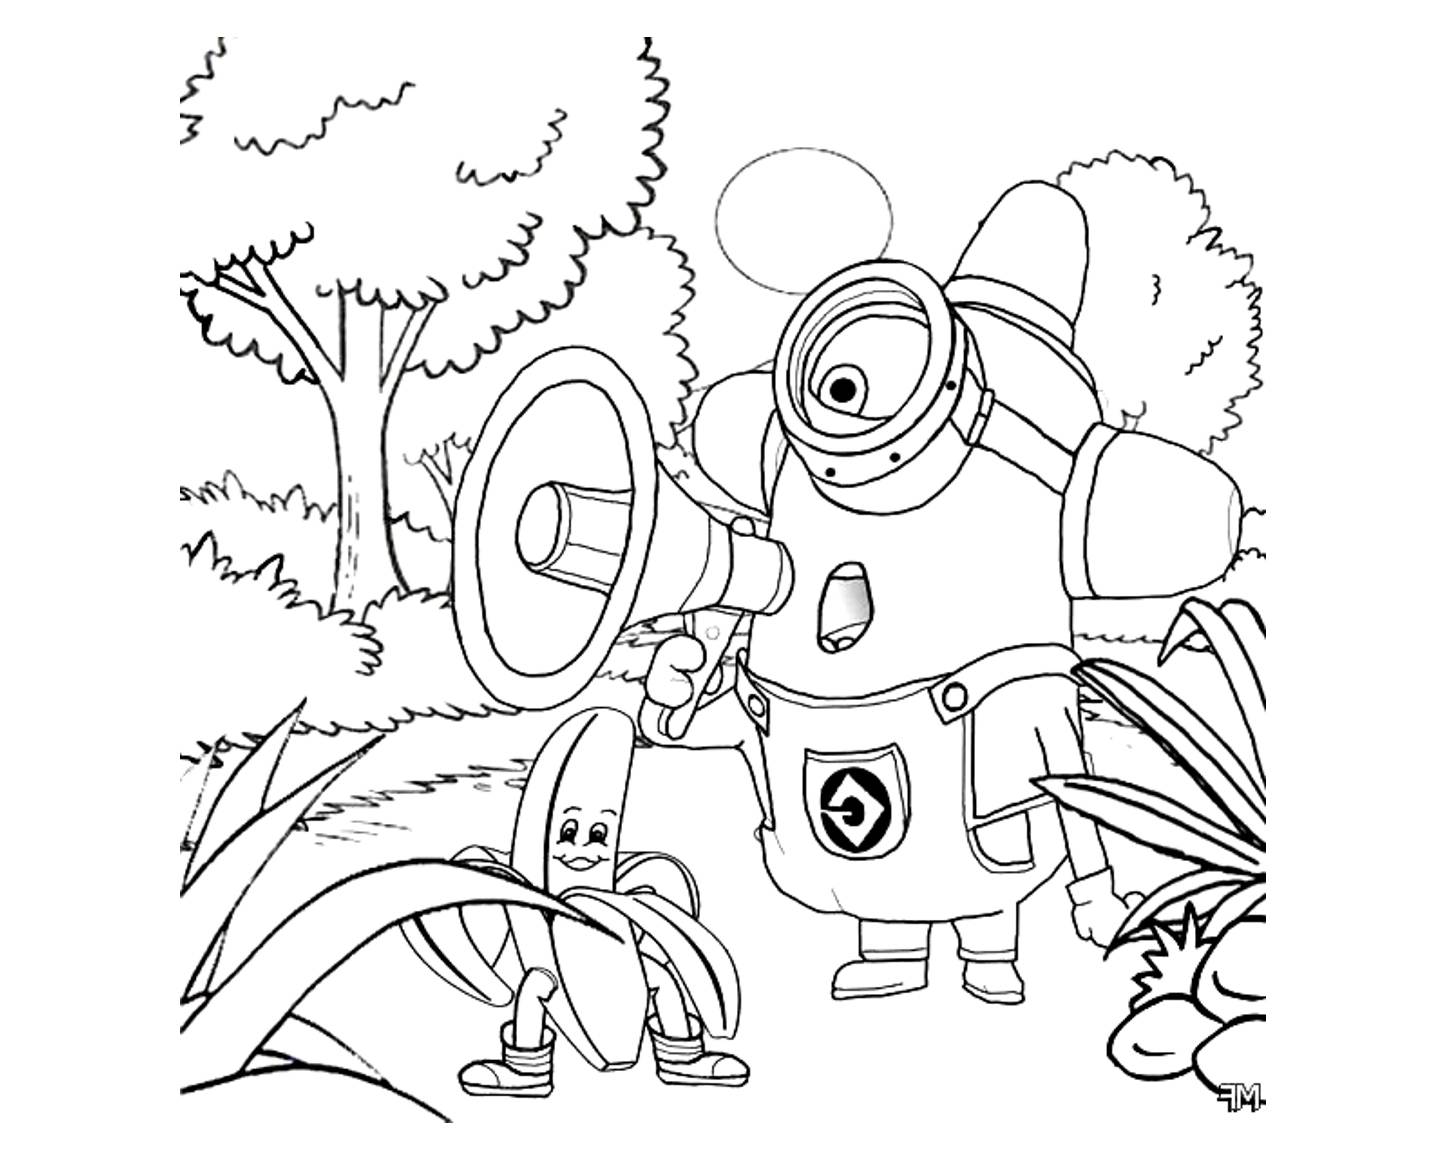 Minions drawing black and white vector free download